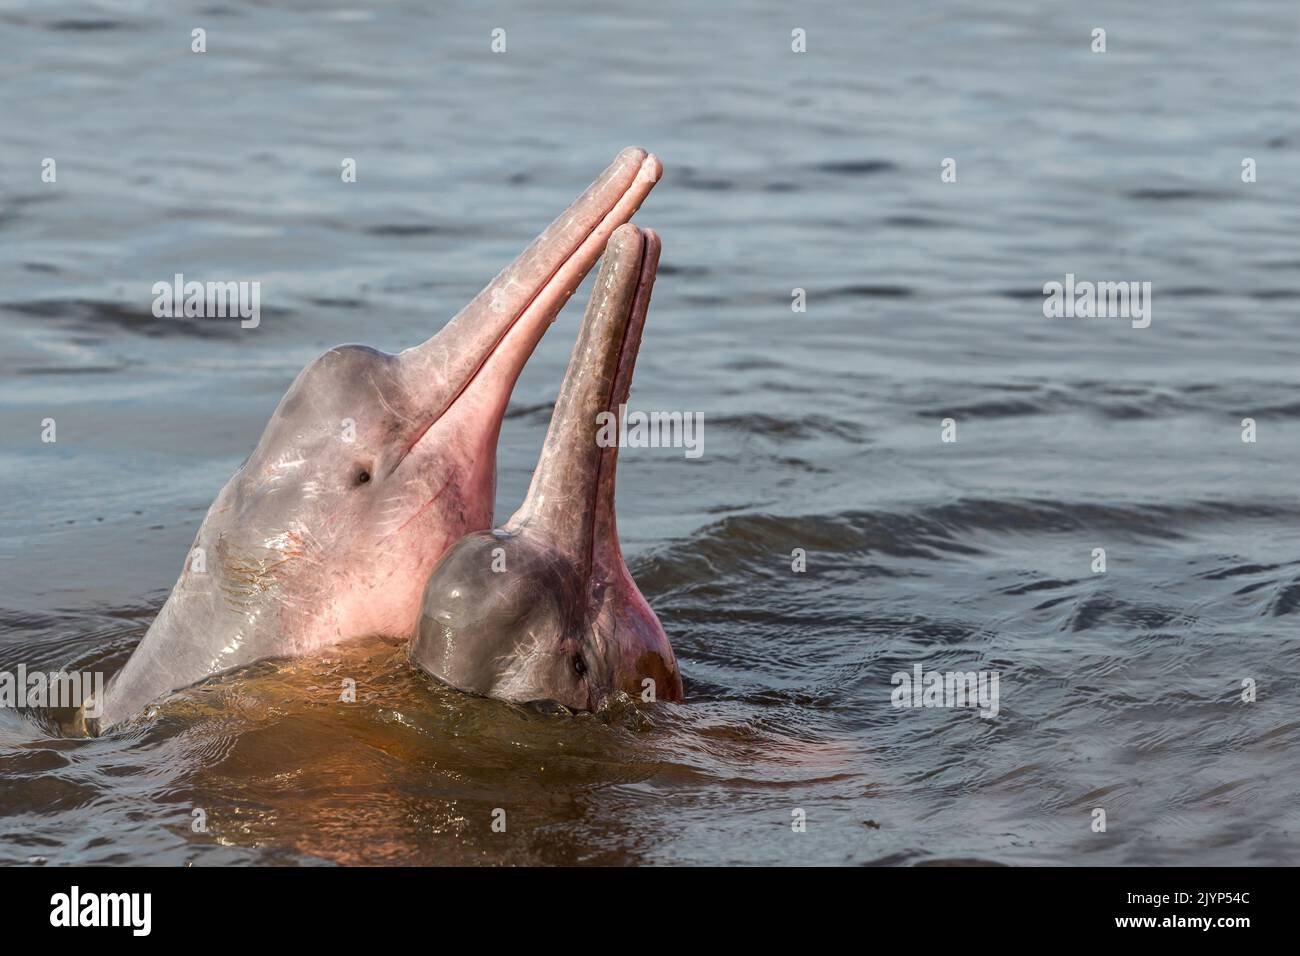 Amazon River Dolphin, Pink River Dolphin or Boto (Inia geoffrensis) , Two wild animals in tannin-rich water , extremely rare picture of wild animals spyhopping ,Threatened species (IUCN Red List), along Rio Negro, Amazon river basin, Amazonas state, Manaus, Brazil, South America Stock Photo